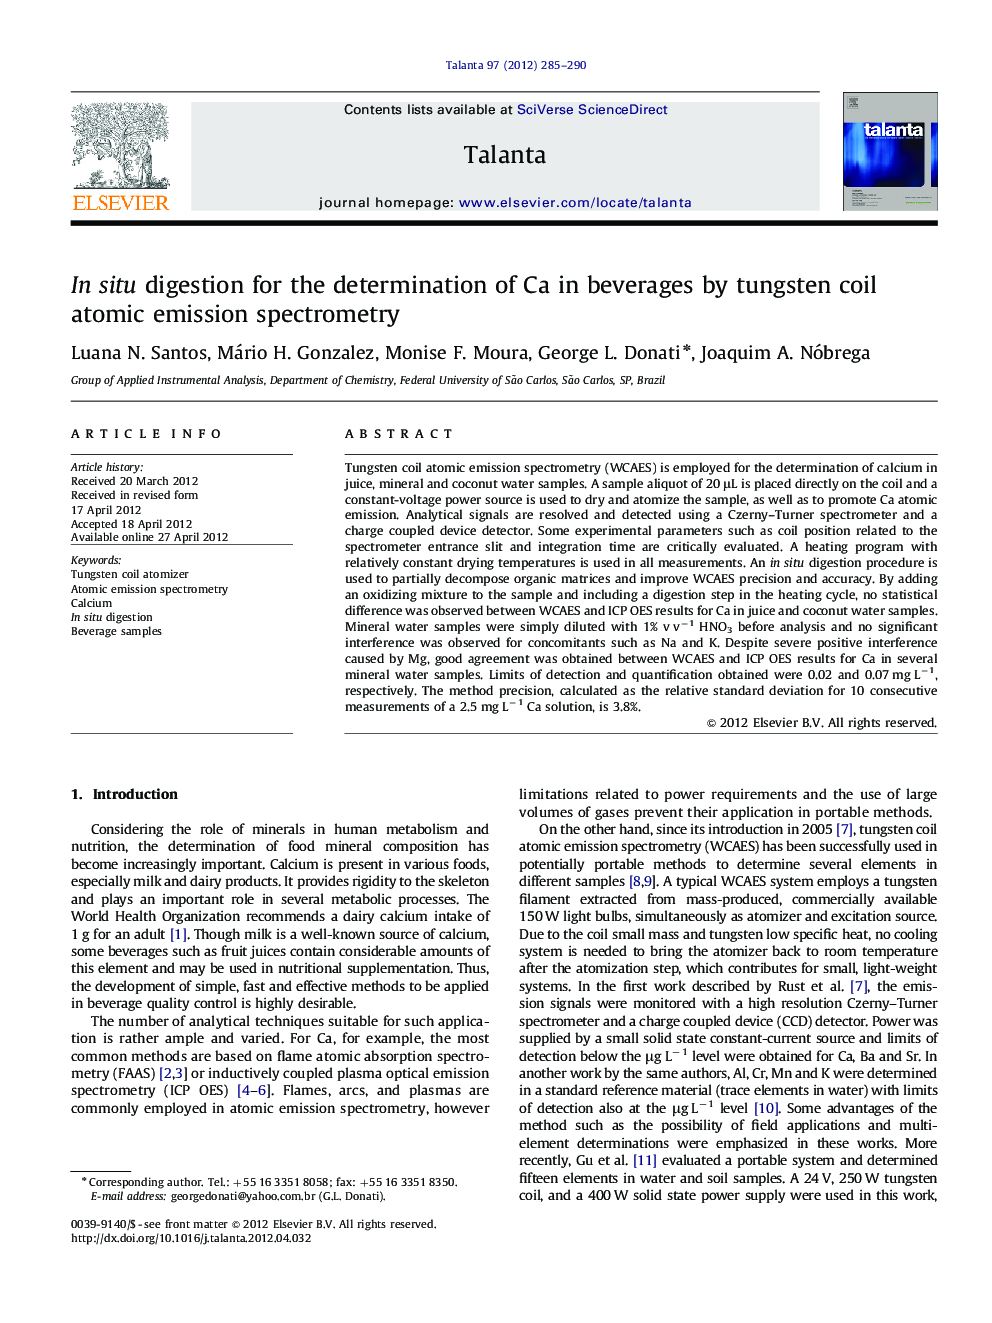 In situ digestion for the determination of Ca in beverages by tungsten coil atomic emission spectrometry